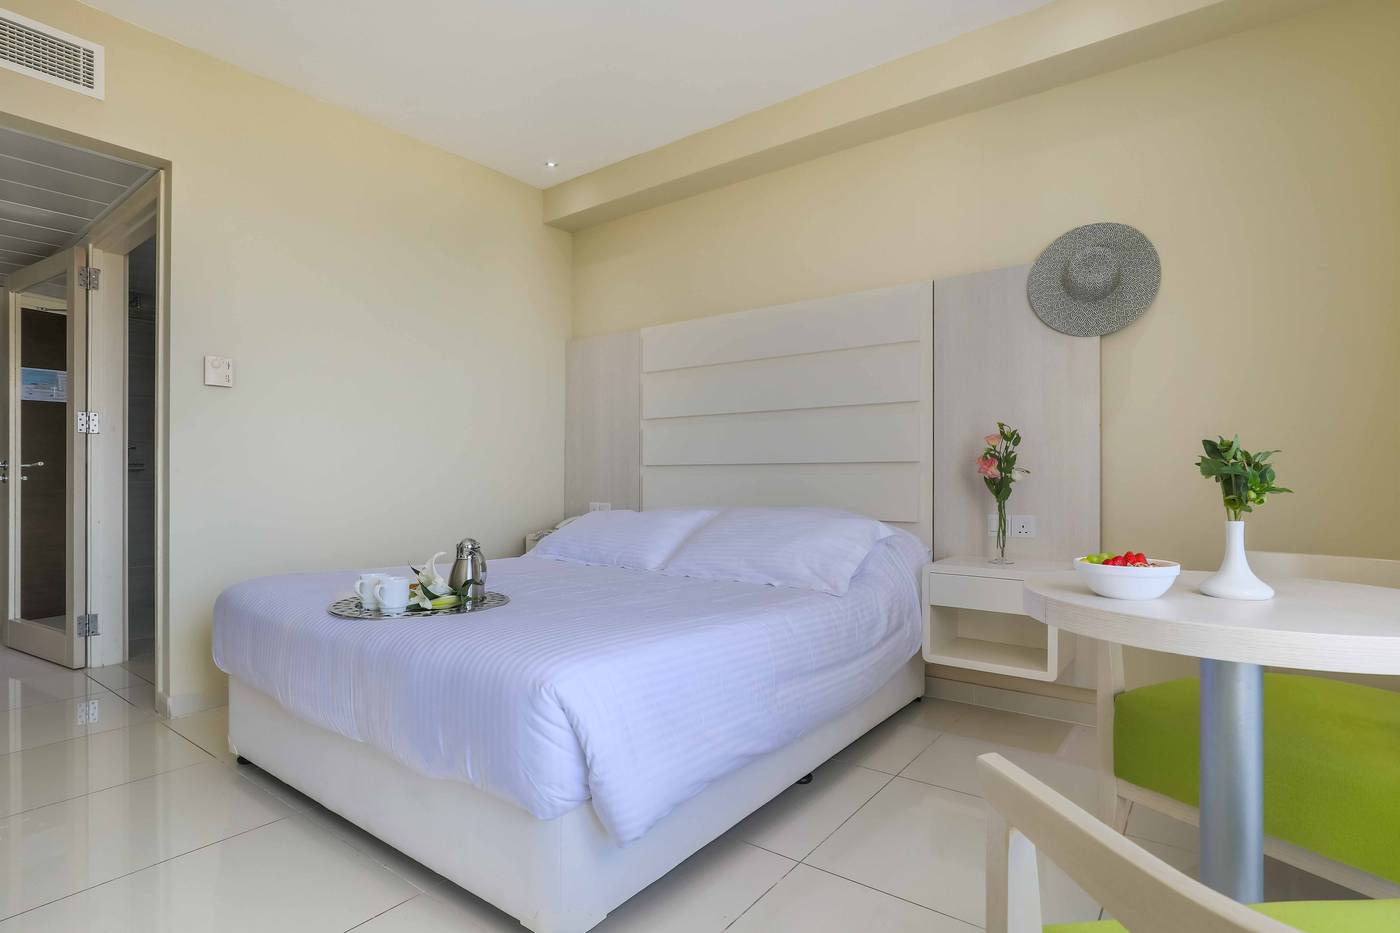 Double room with double bed, TV and seating area.